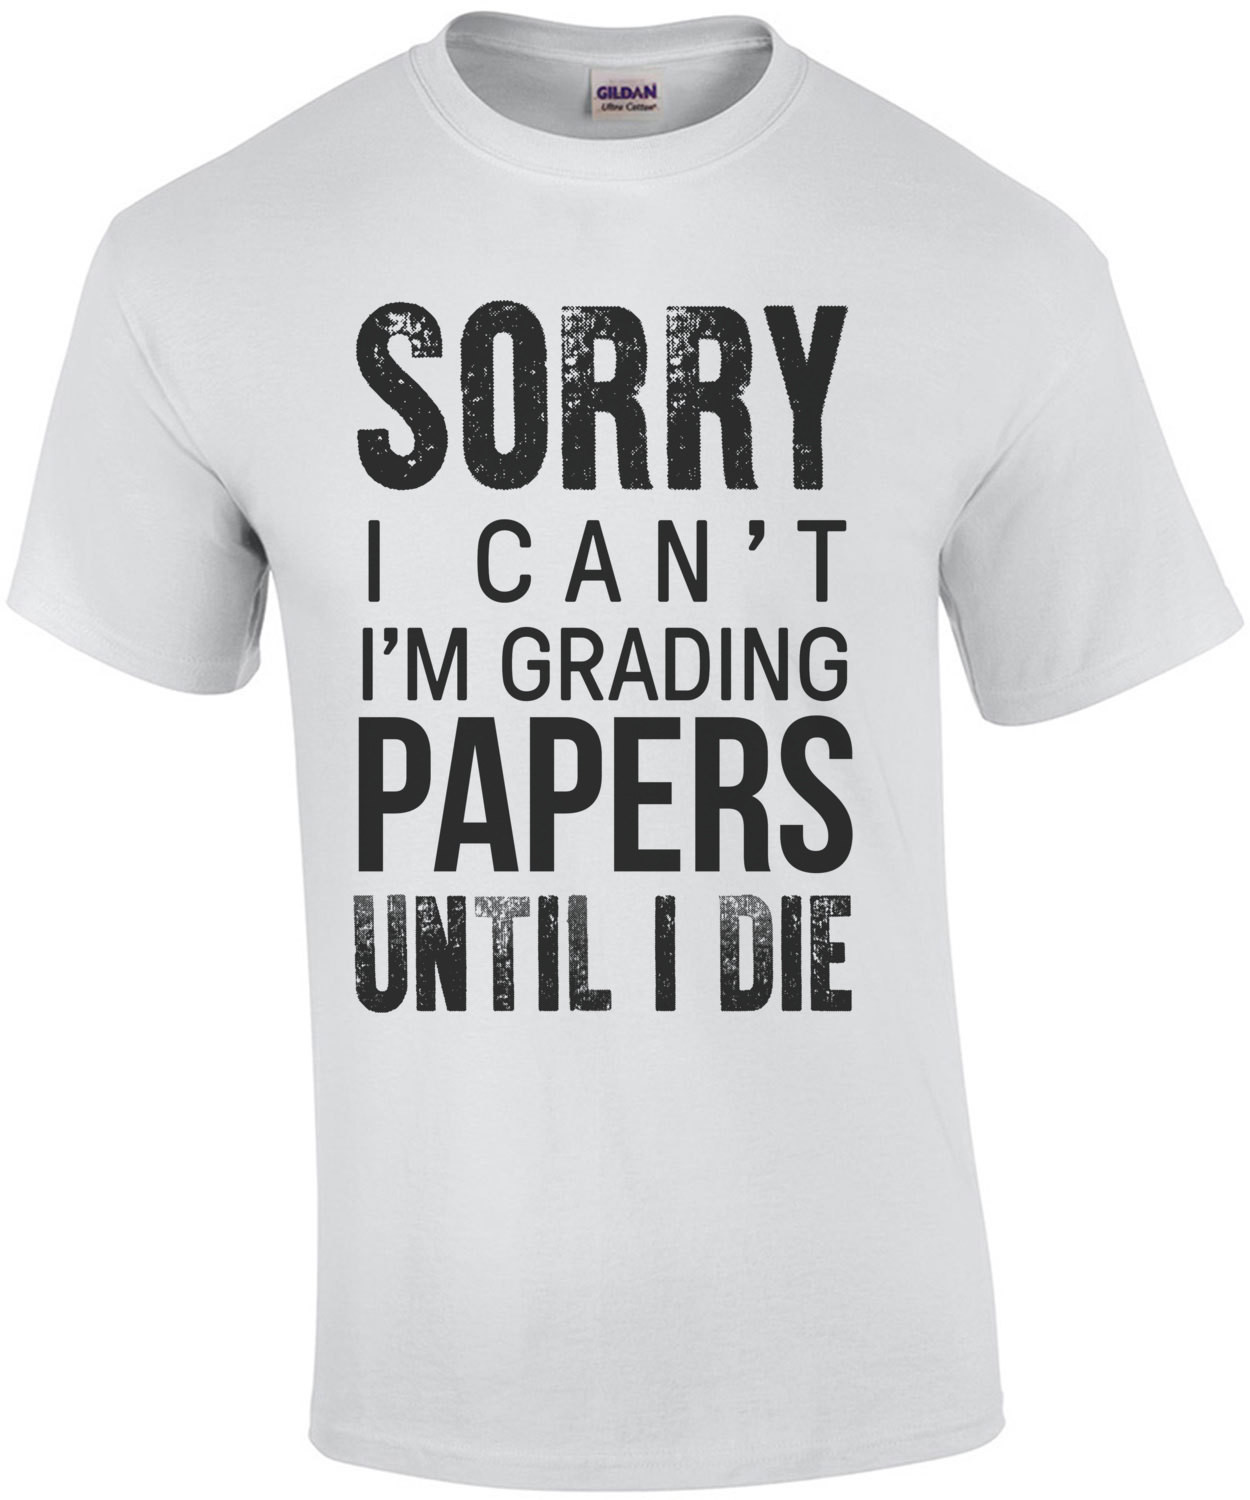 Sorry I can't I'm grading papers until I die - Funny teacher t-shirt